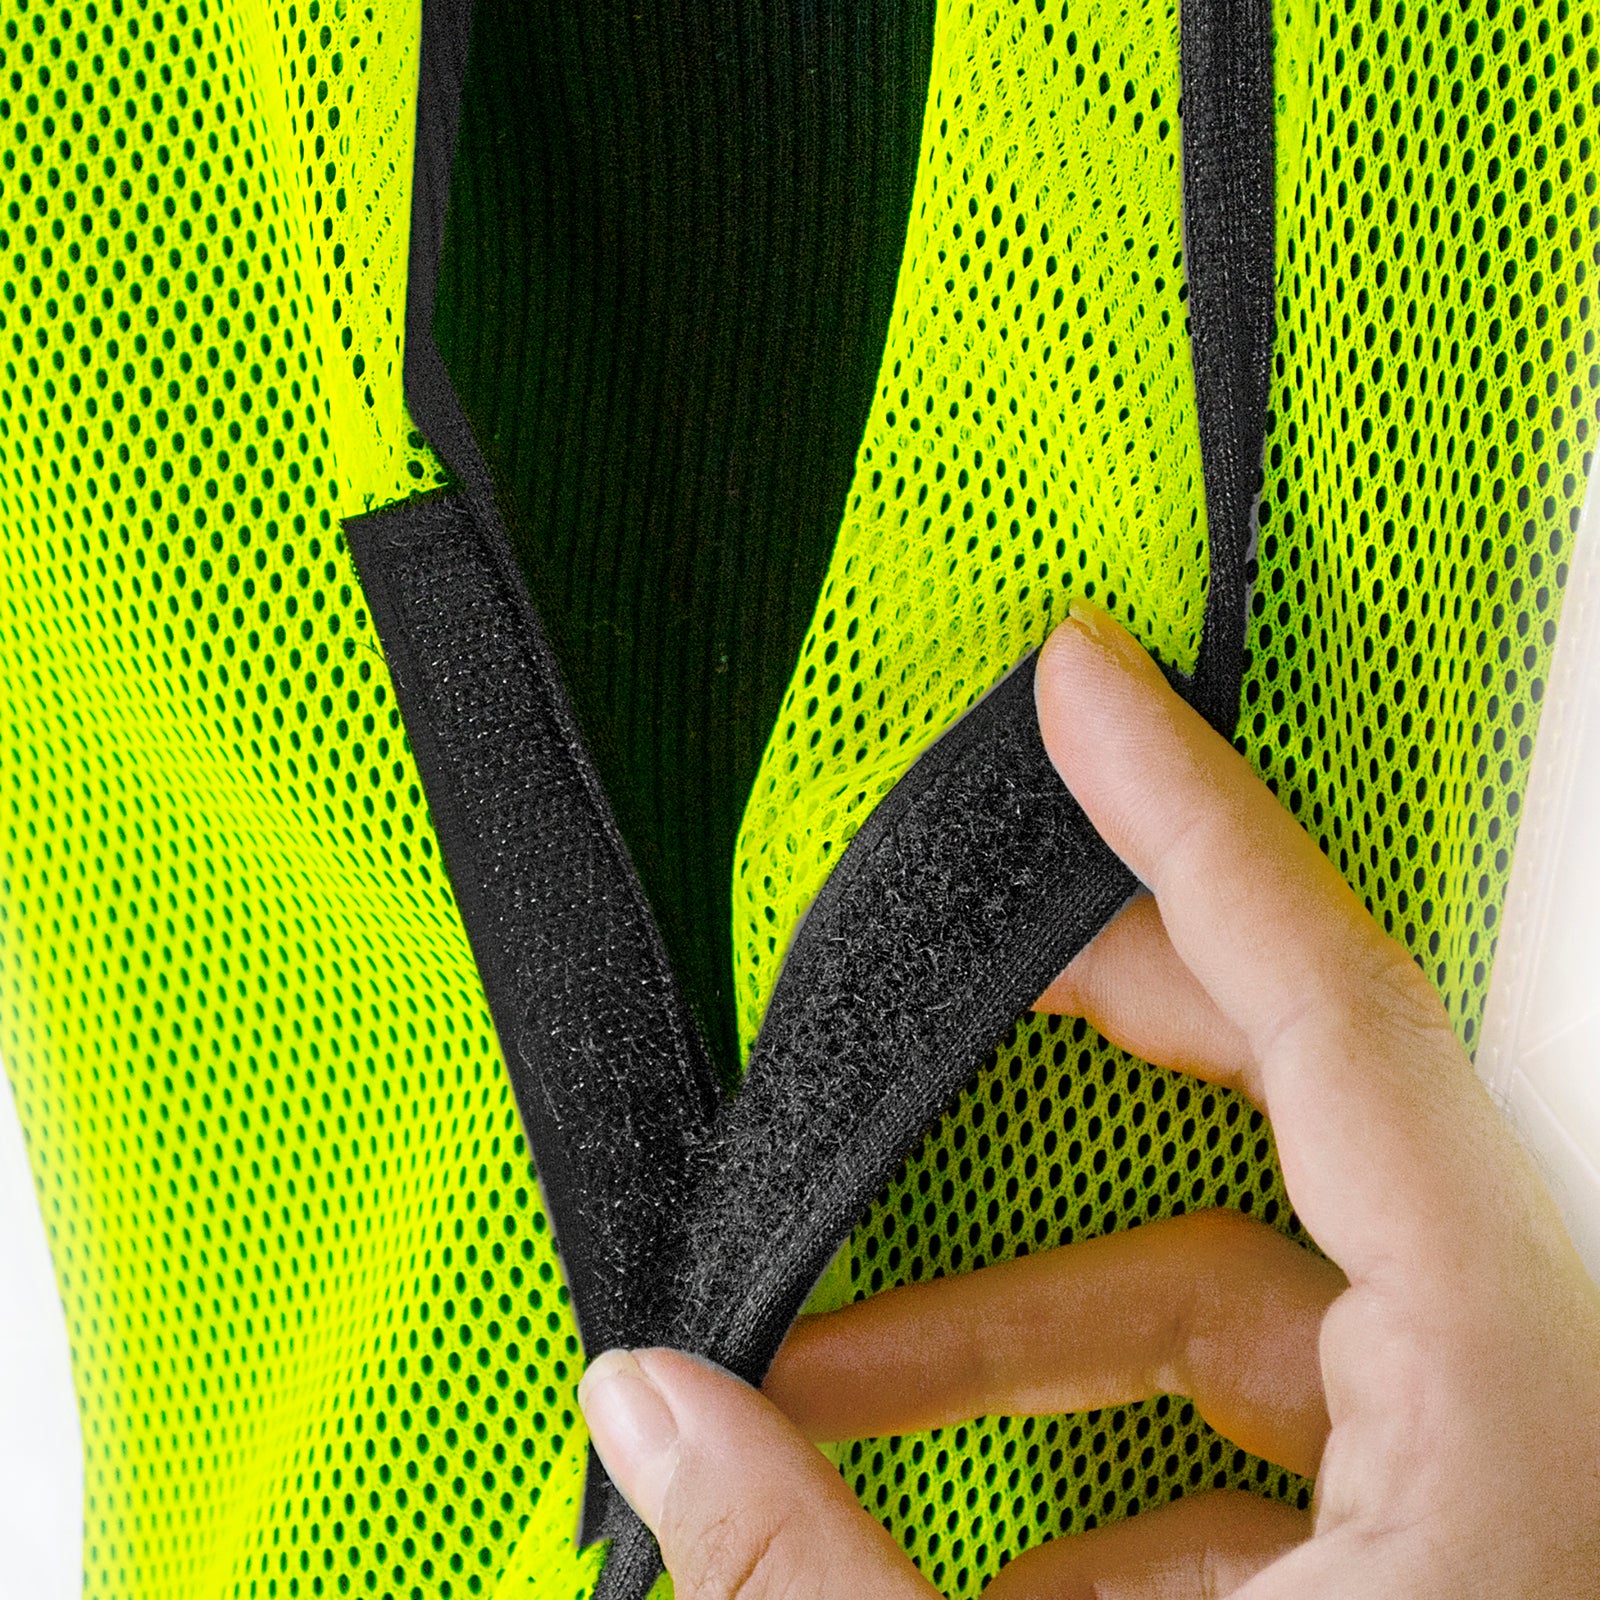 Close-up shows the hook and loop fastener system of the hi visibility safety vest with prismatic stripes